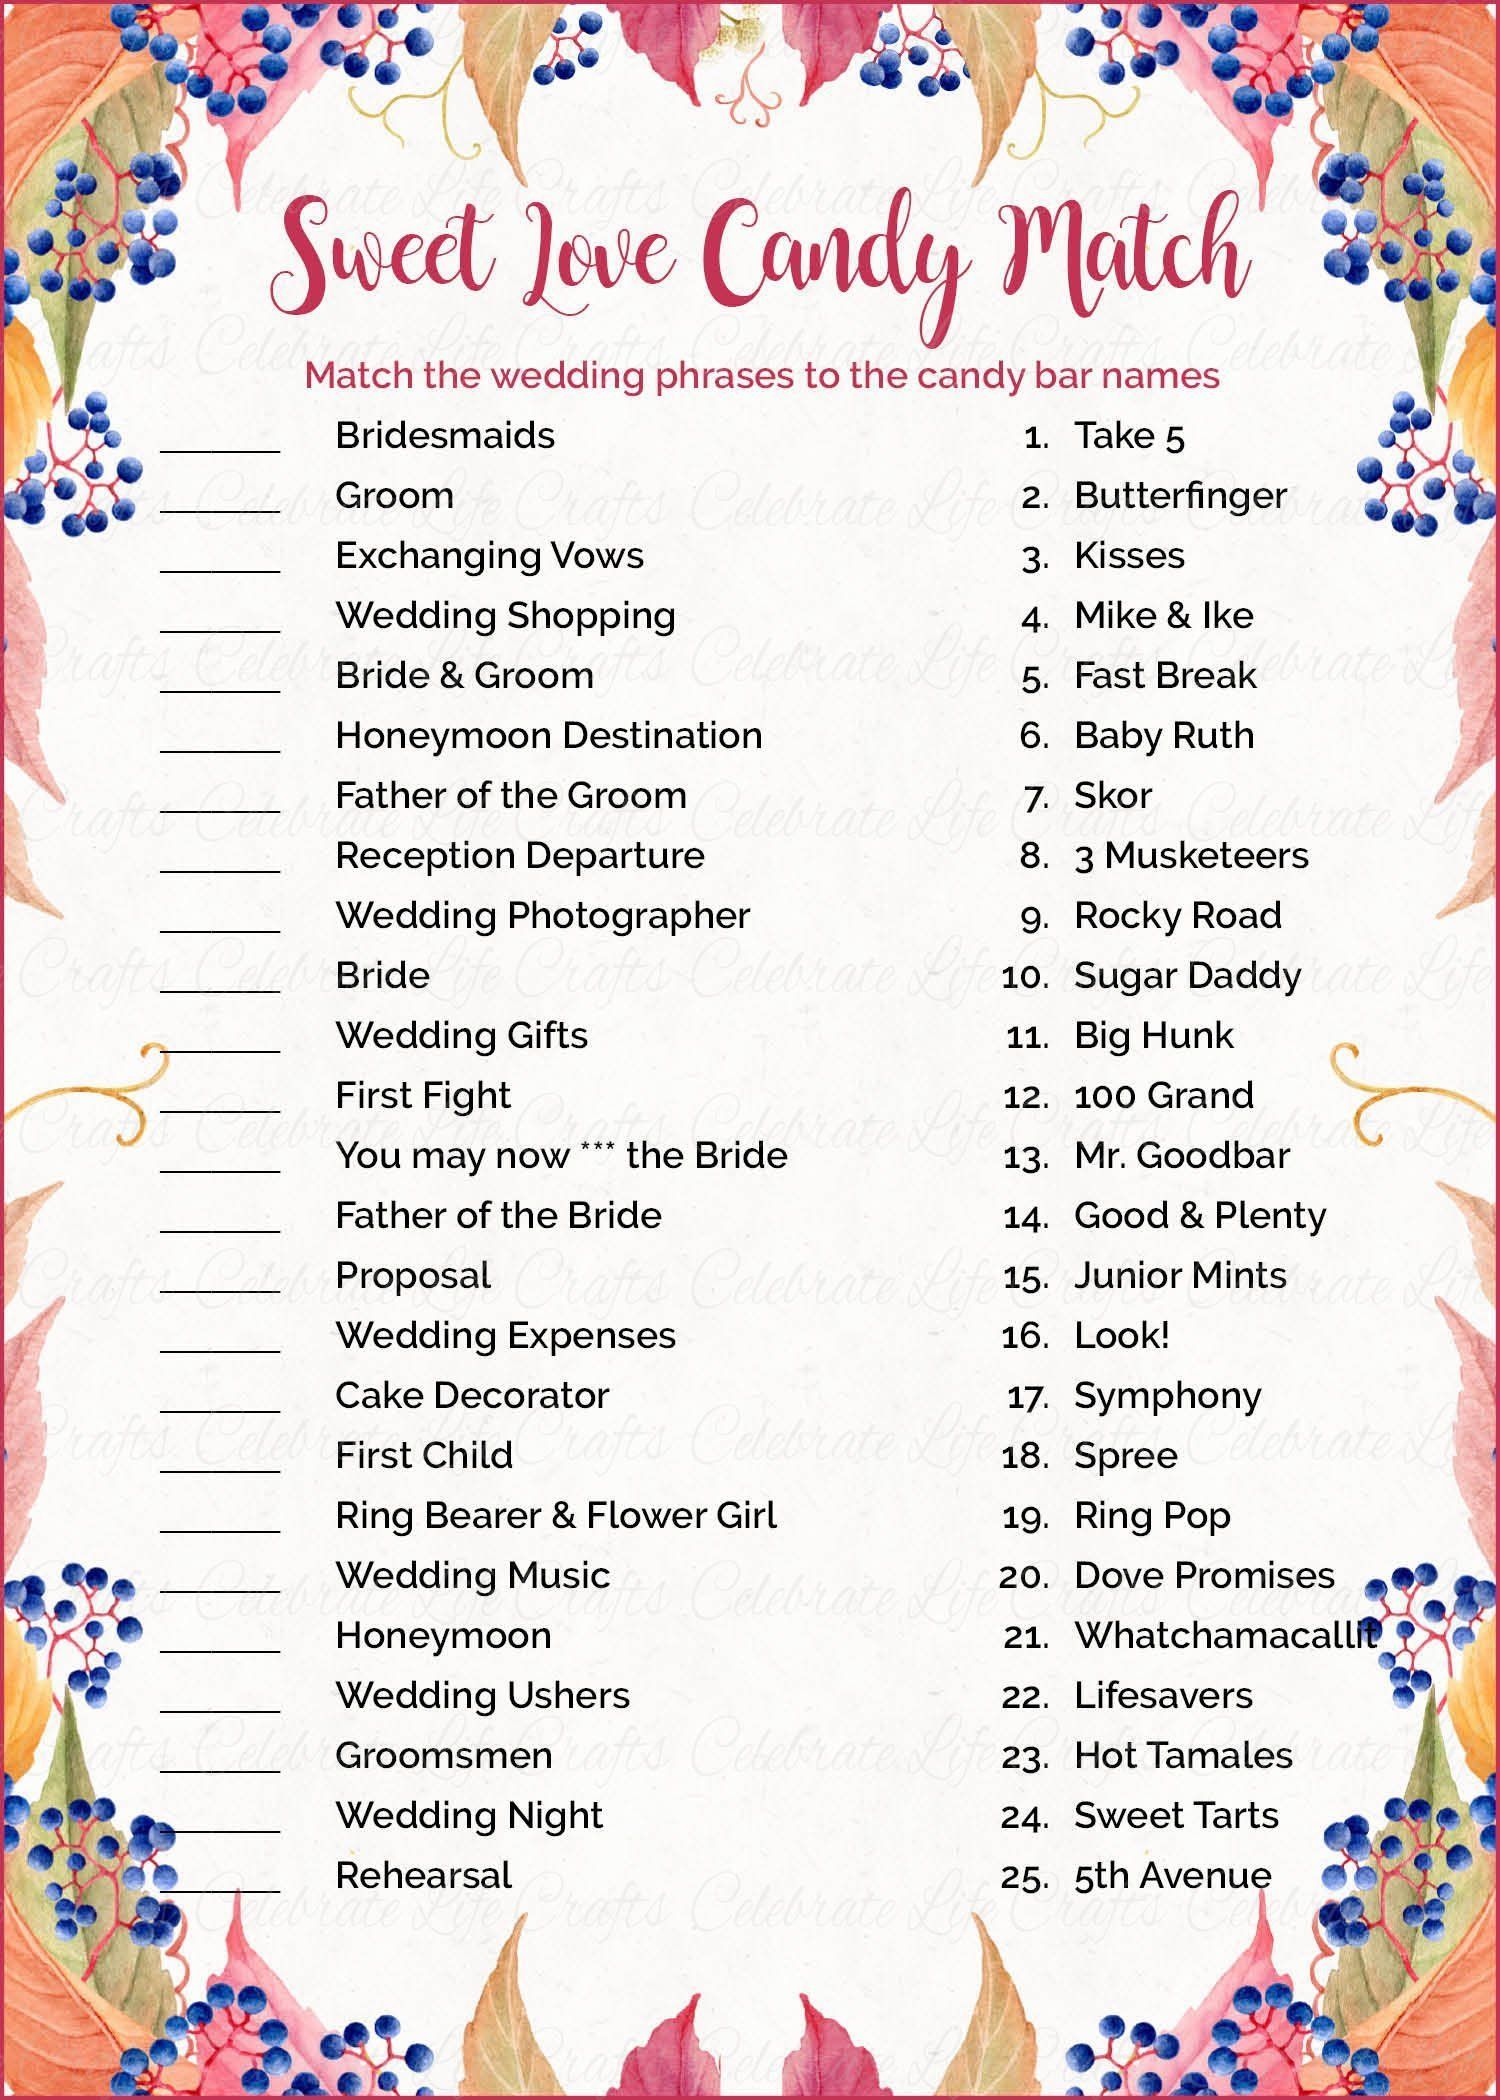 Sweet Love Candy Match Bridal Shower Game - PRINTABLE DOWNLOAD - Falling in Love Wedding Shower Game - BR1006 -   17 wedding Budget 7000
 ideas